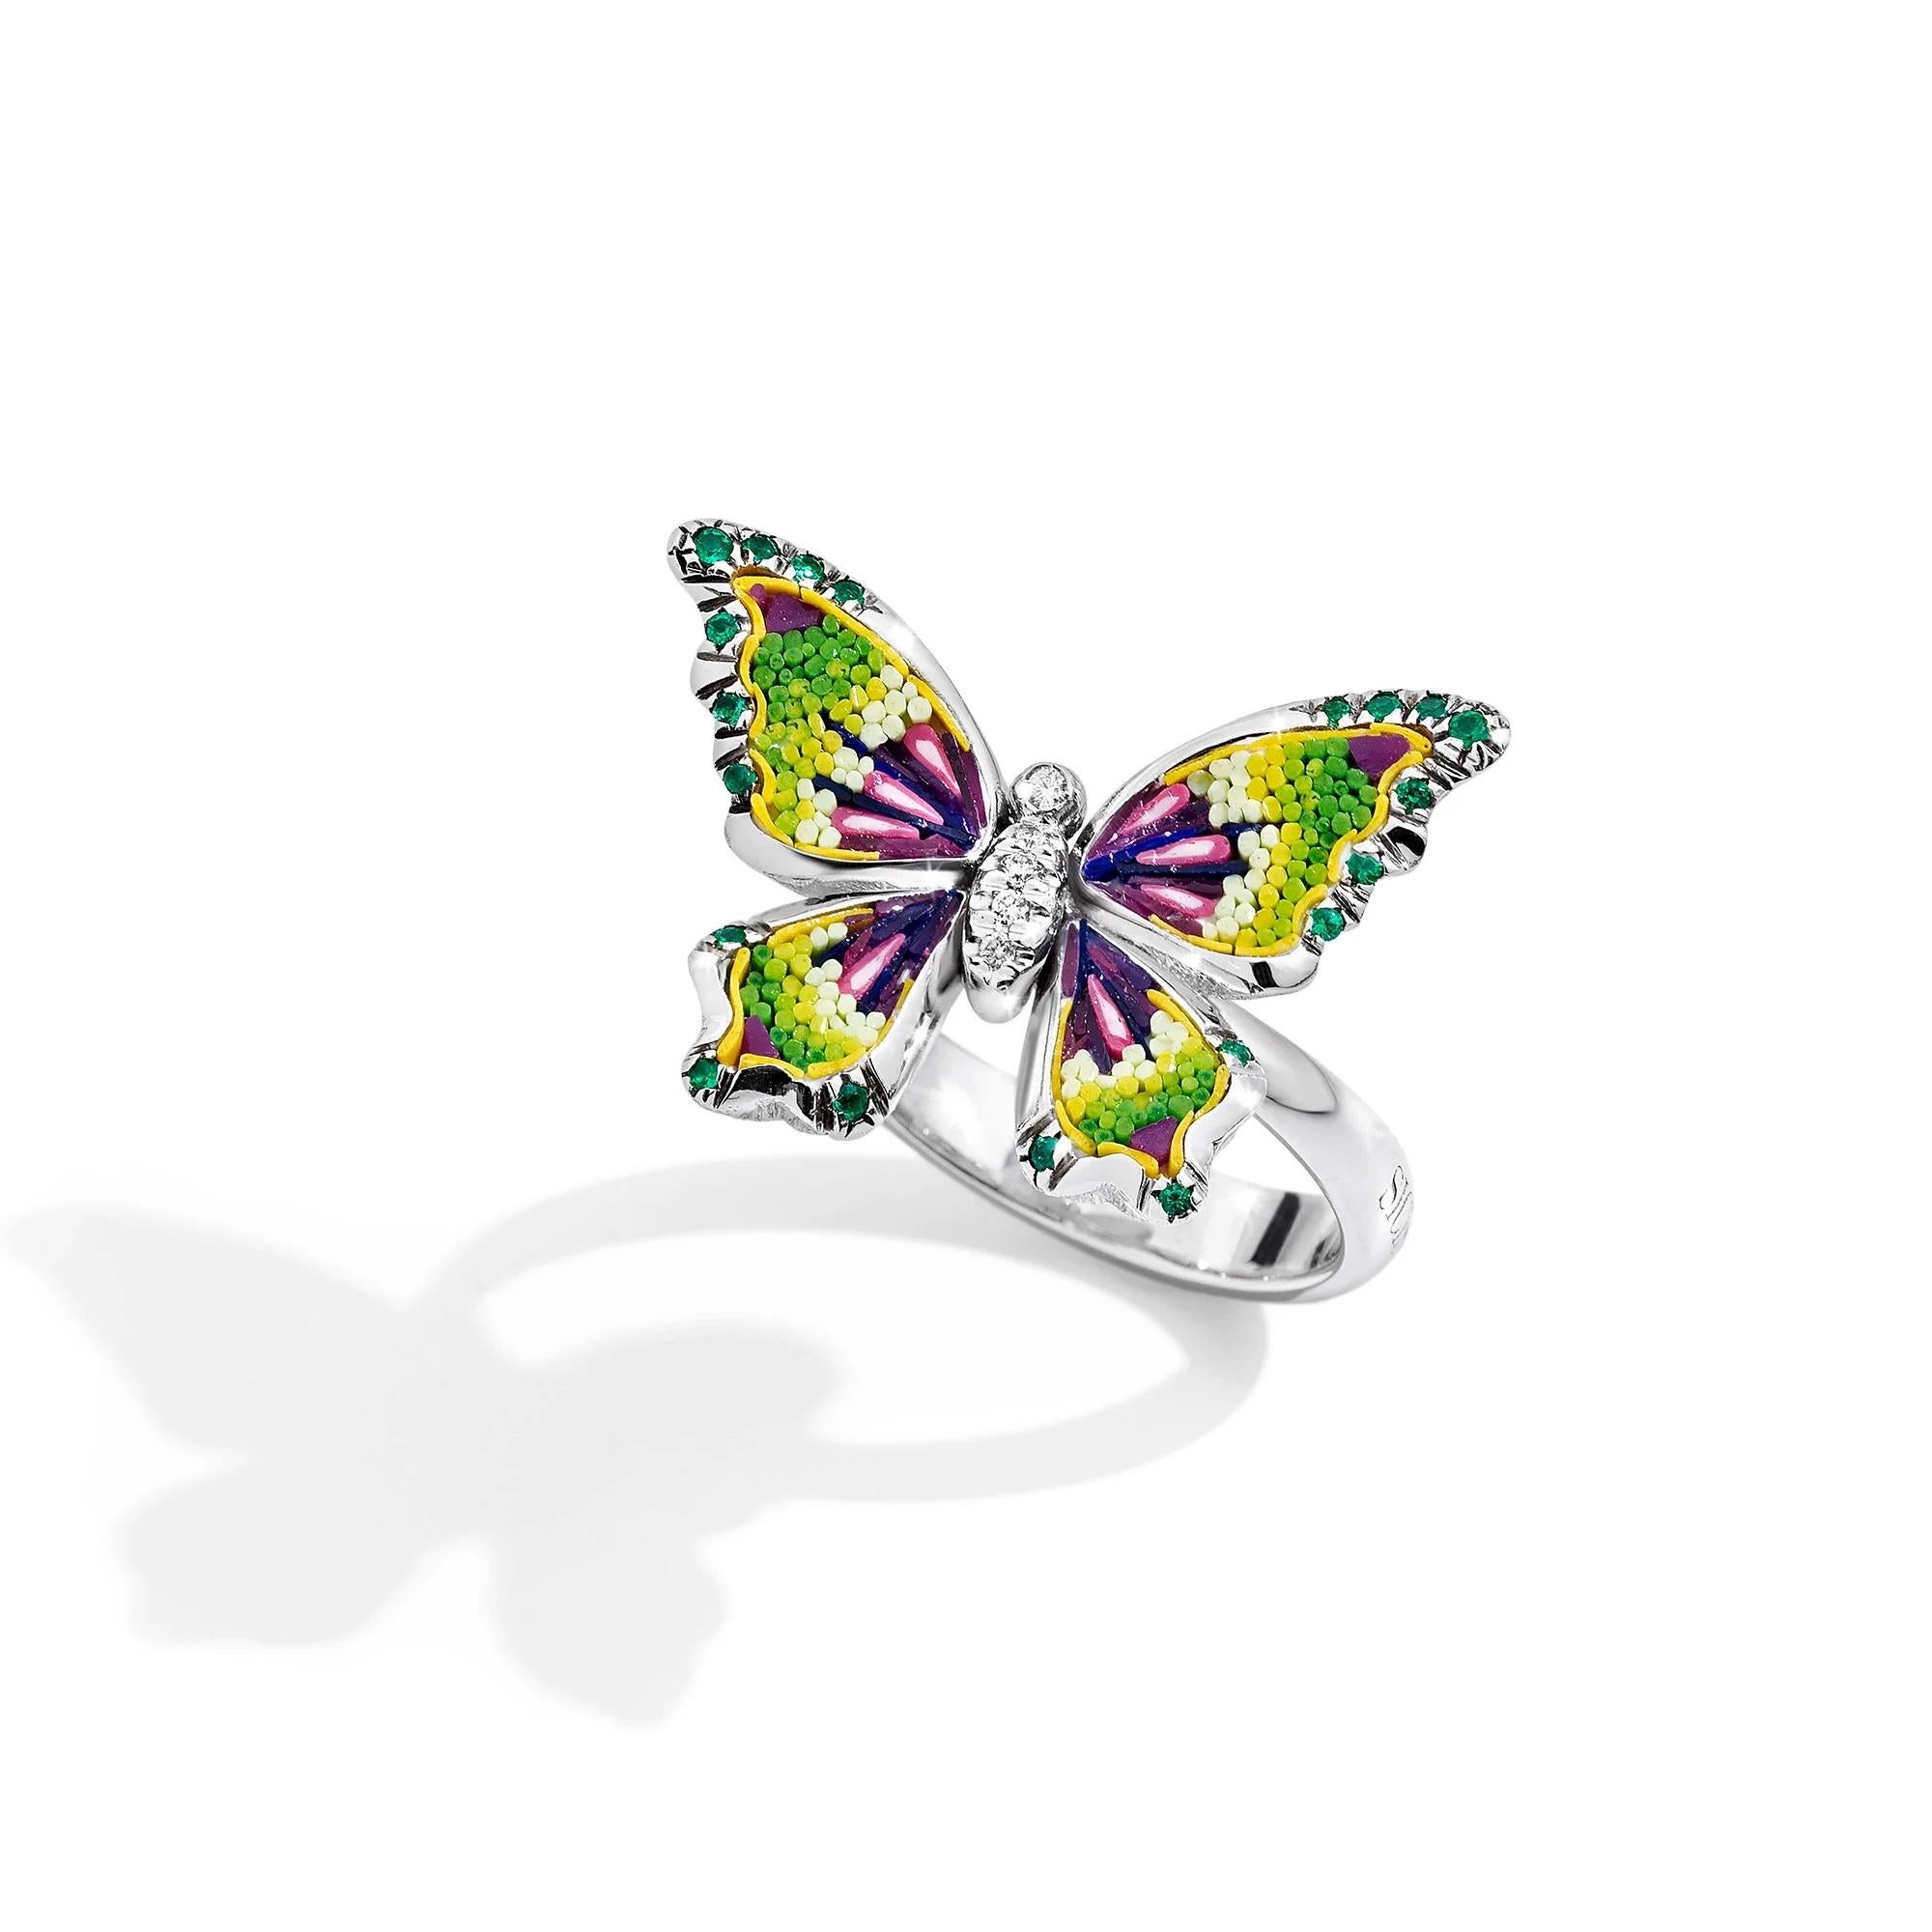 For Sale:  Butterfly Ring White Gold White Diamonds Emeralds Hand Decorated with Micromosai 4